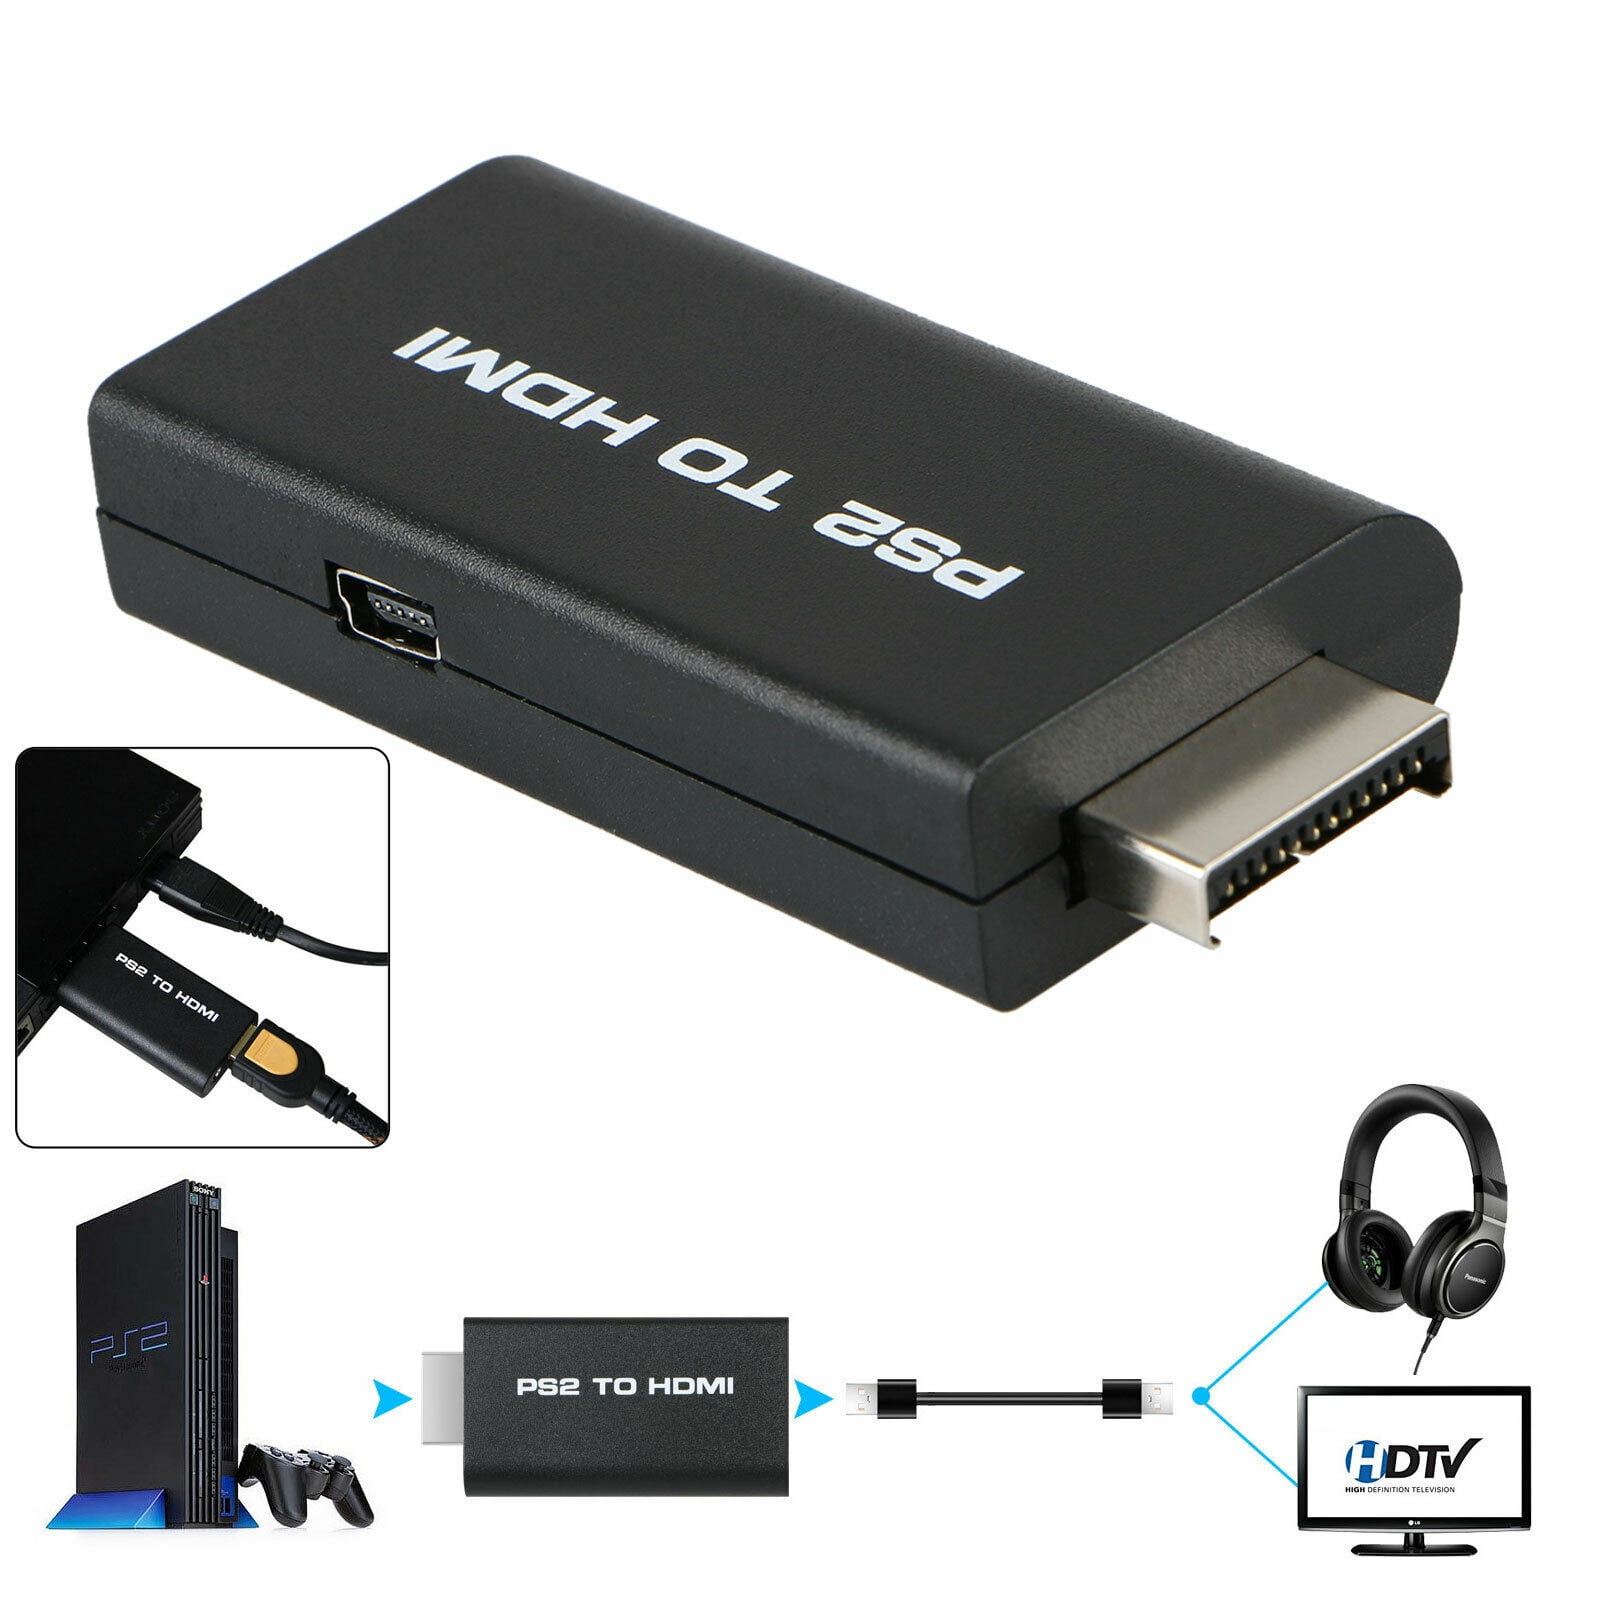 Ps2 Hdmi Converter Work, Ps2 Hdmi Converter Doesnt Work